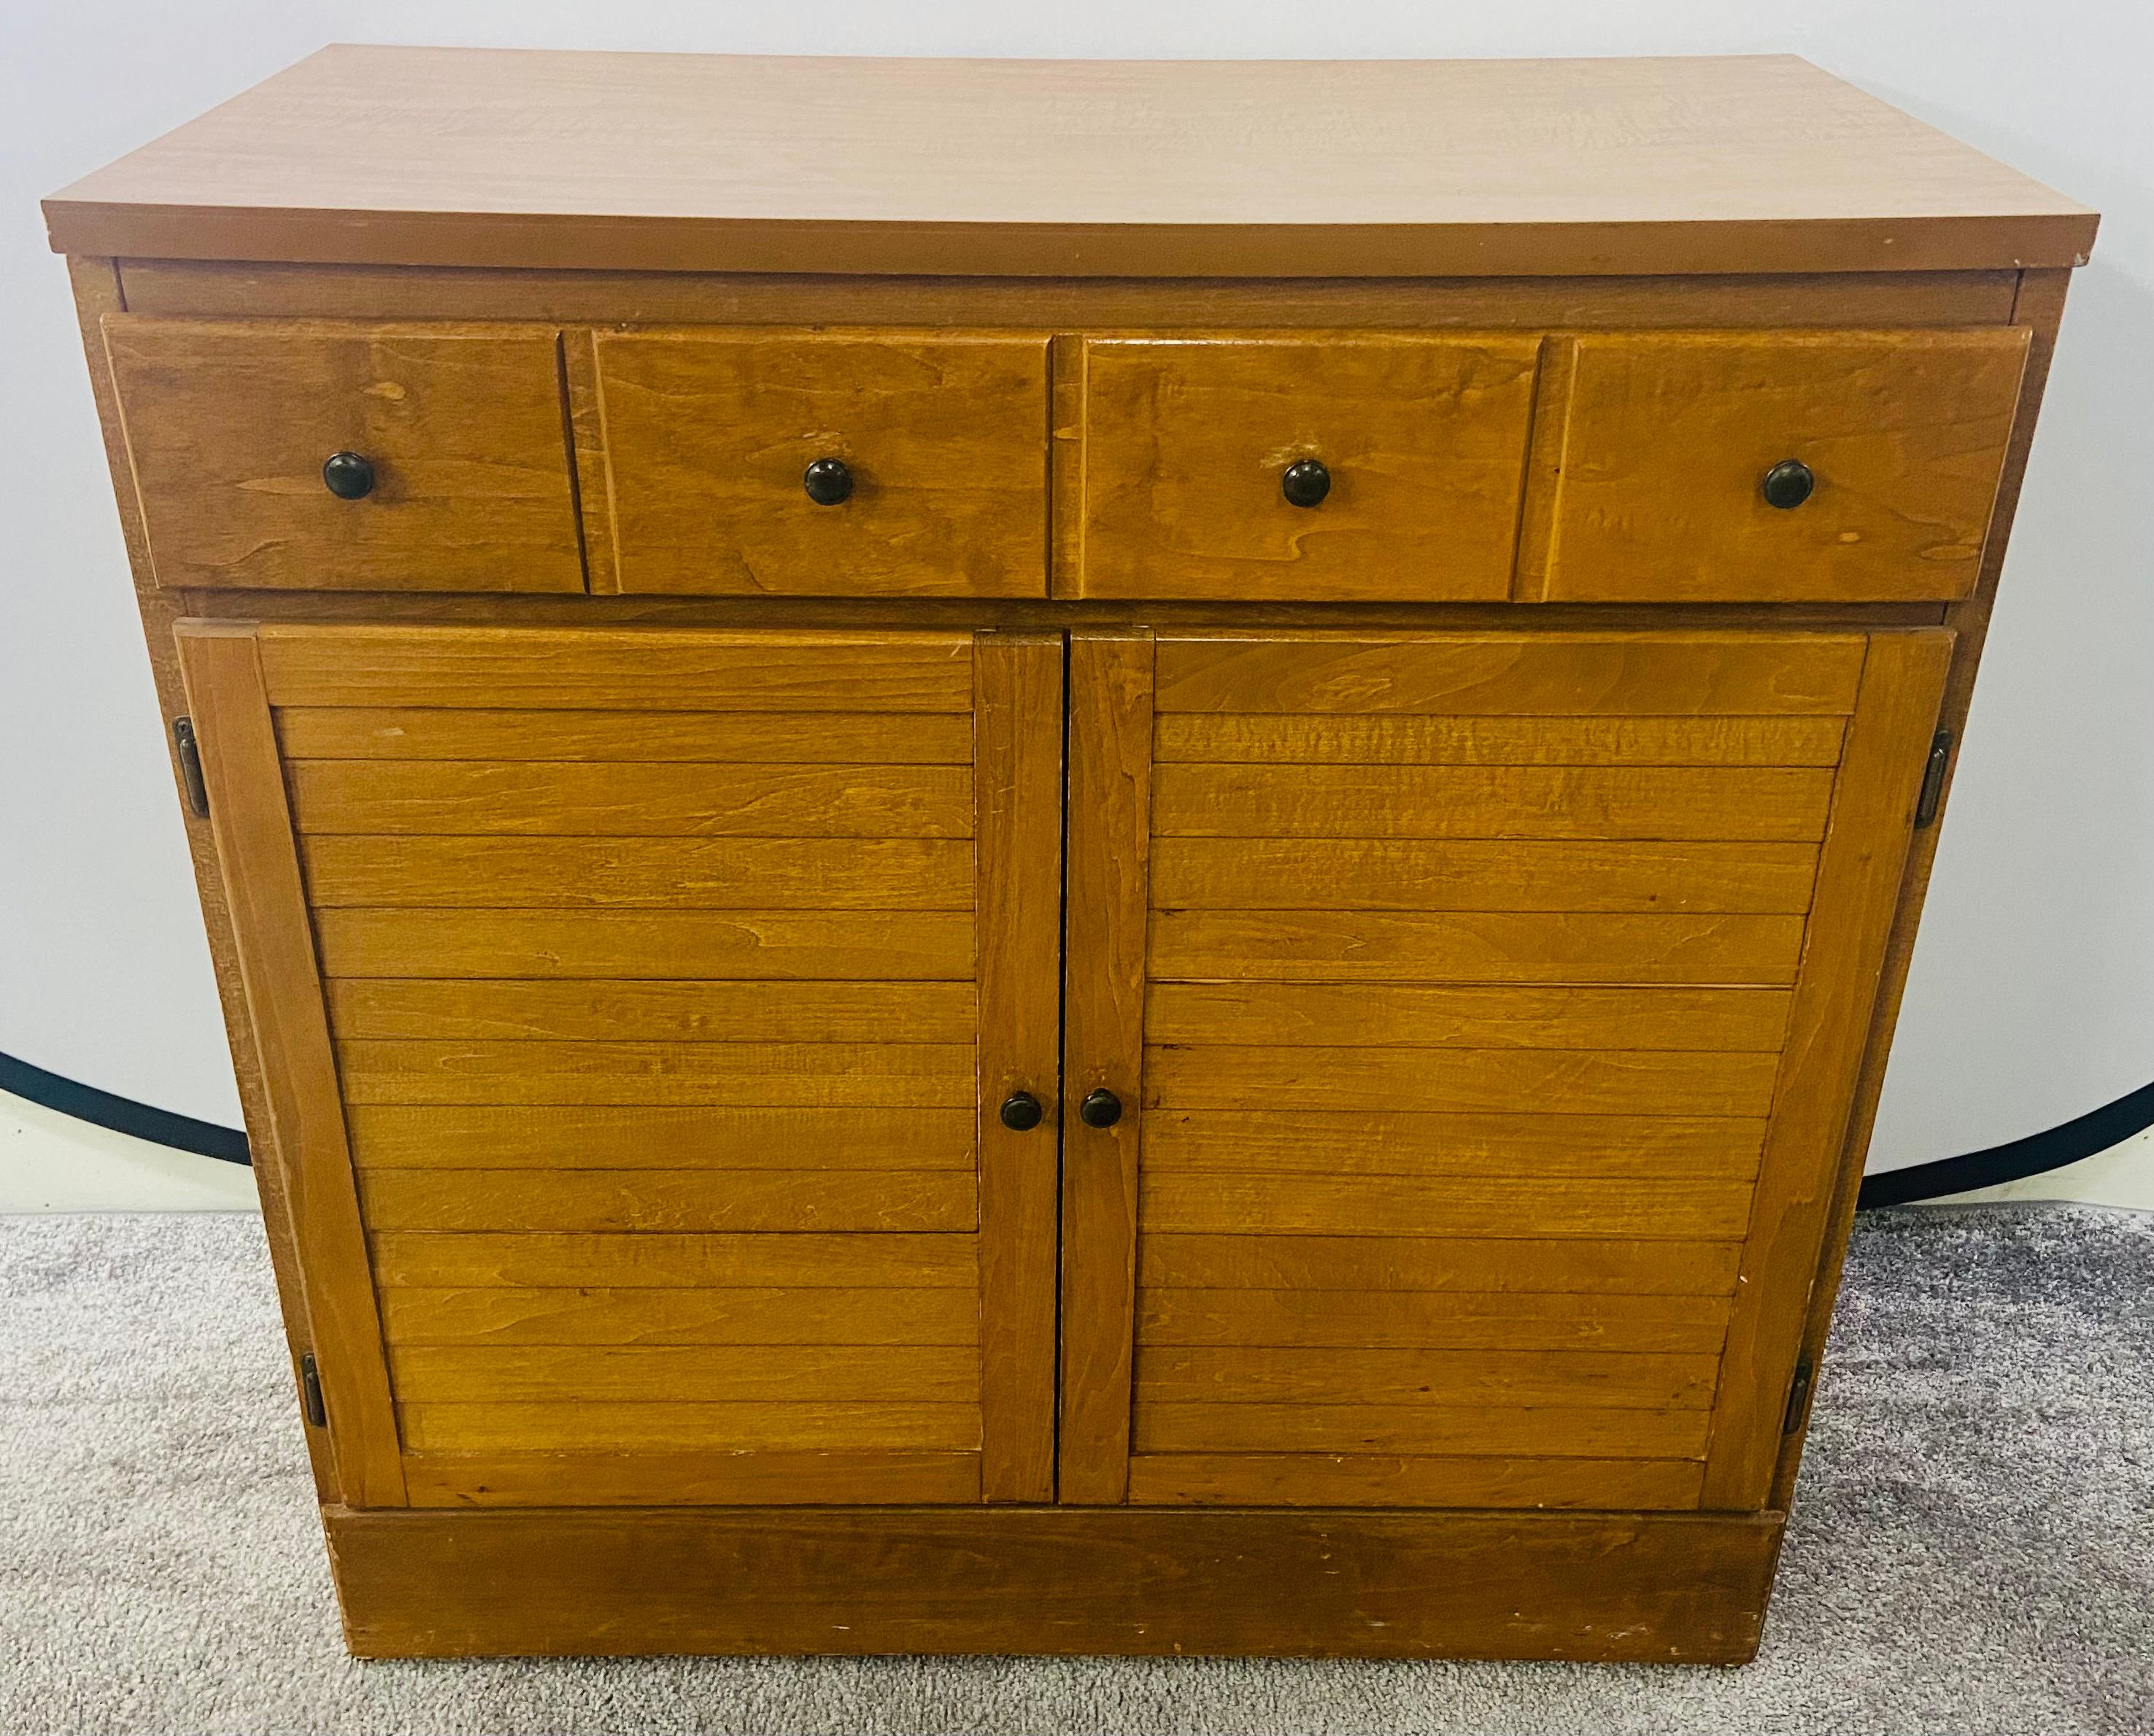 A charming and elegant Mid-Century Modern nightstand, chest or cabinet. The MCM chest features a one large drawer over two door cabinet opening to reveal one shelf for additional storage room. The drawer has four nobs to look as four drawers. All